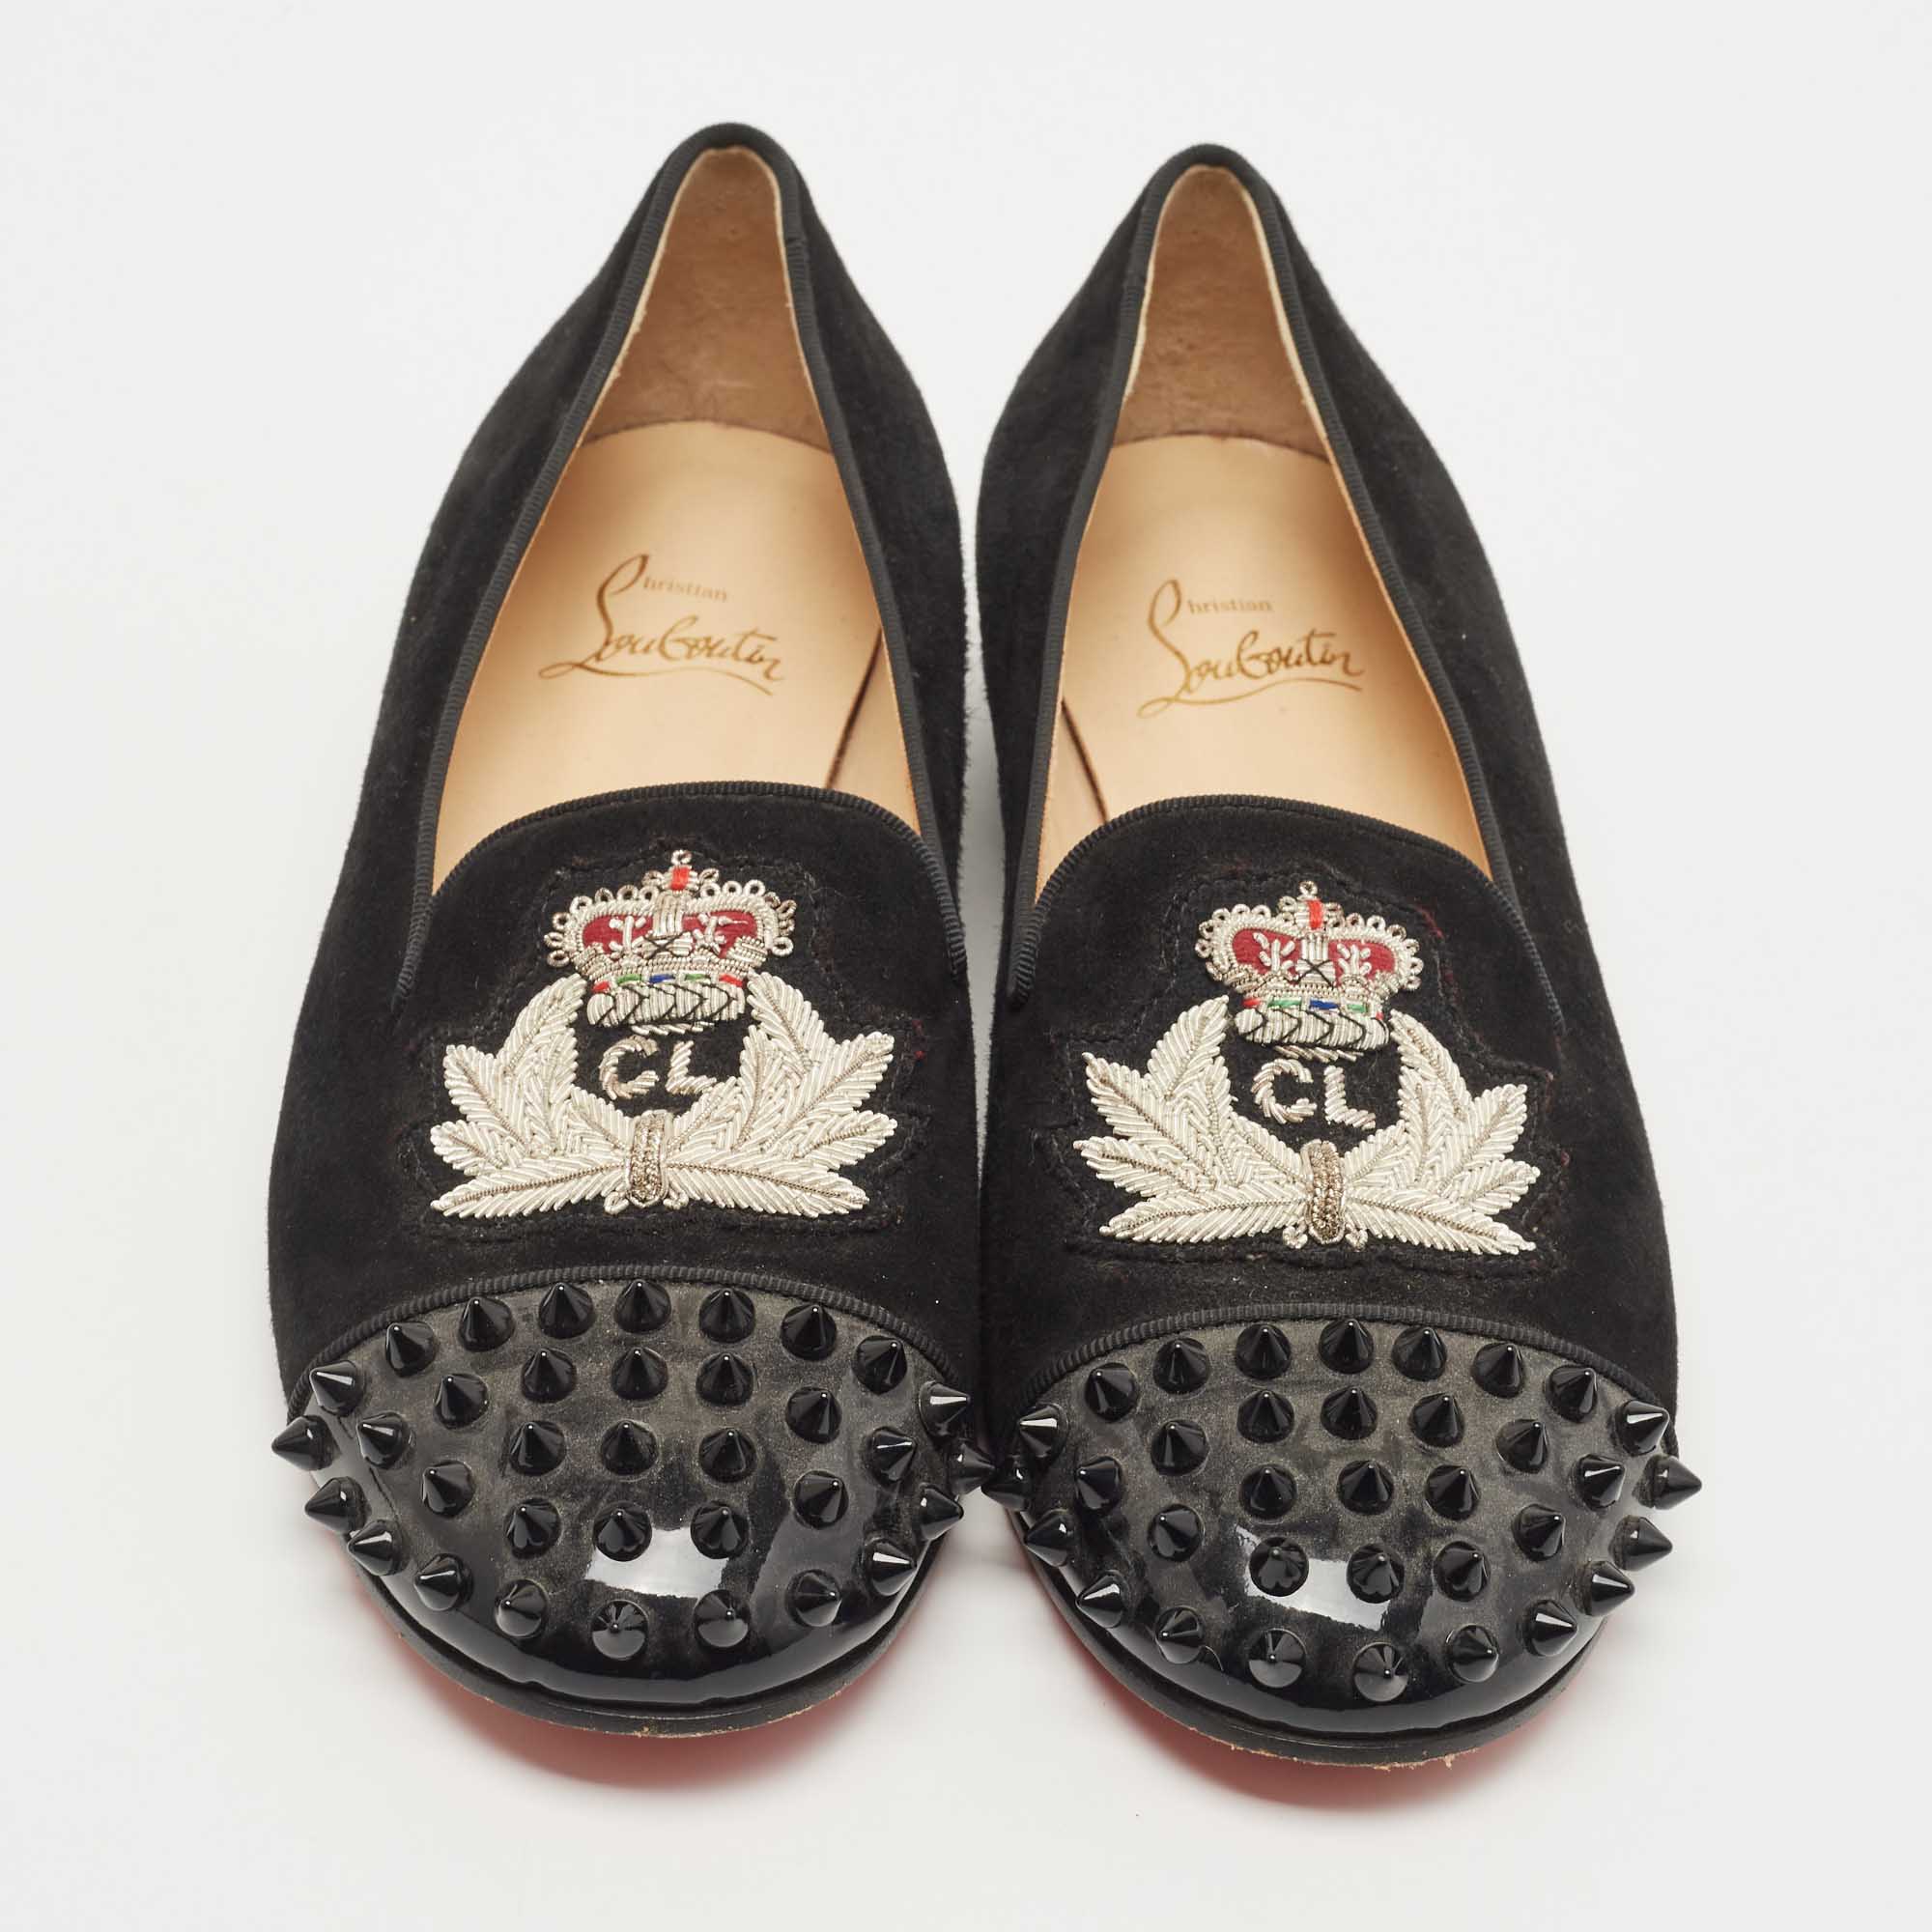 Christian Louboutin Black Suede Harvanana Spiked Smoking Slippers Size 36.5